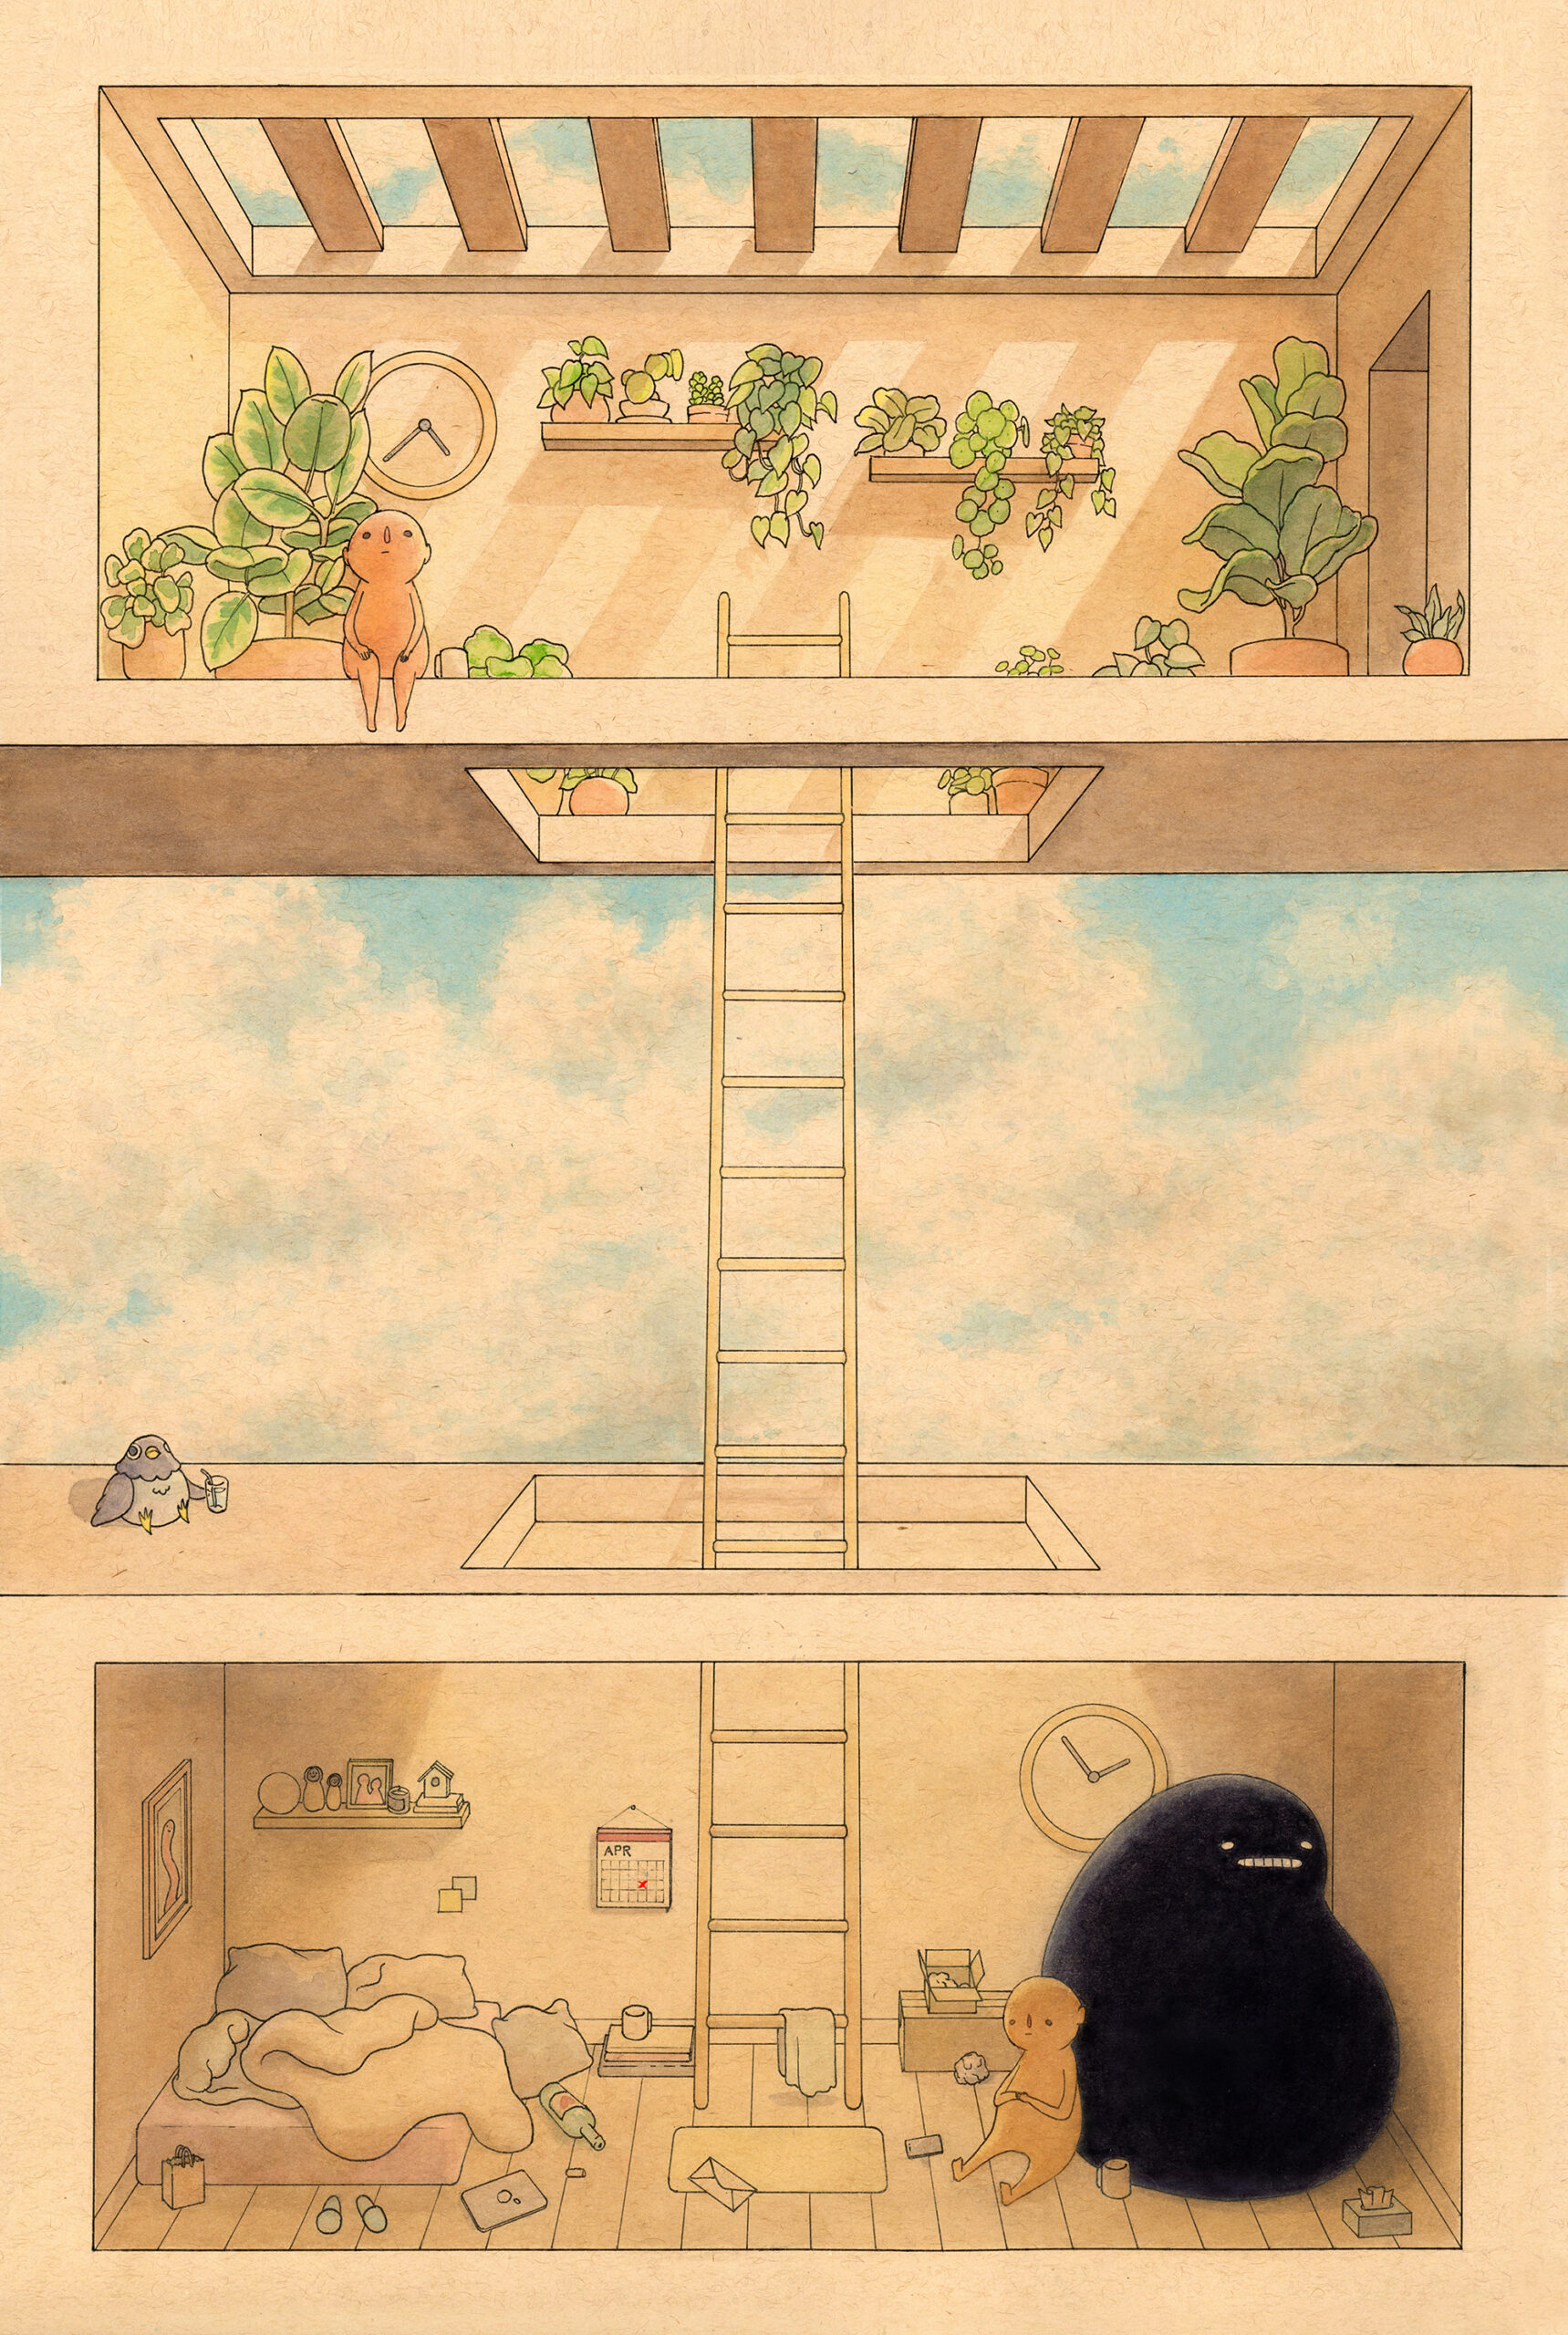 An illustration of a small figure in an apartment with a sunny top and a dark bottom.